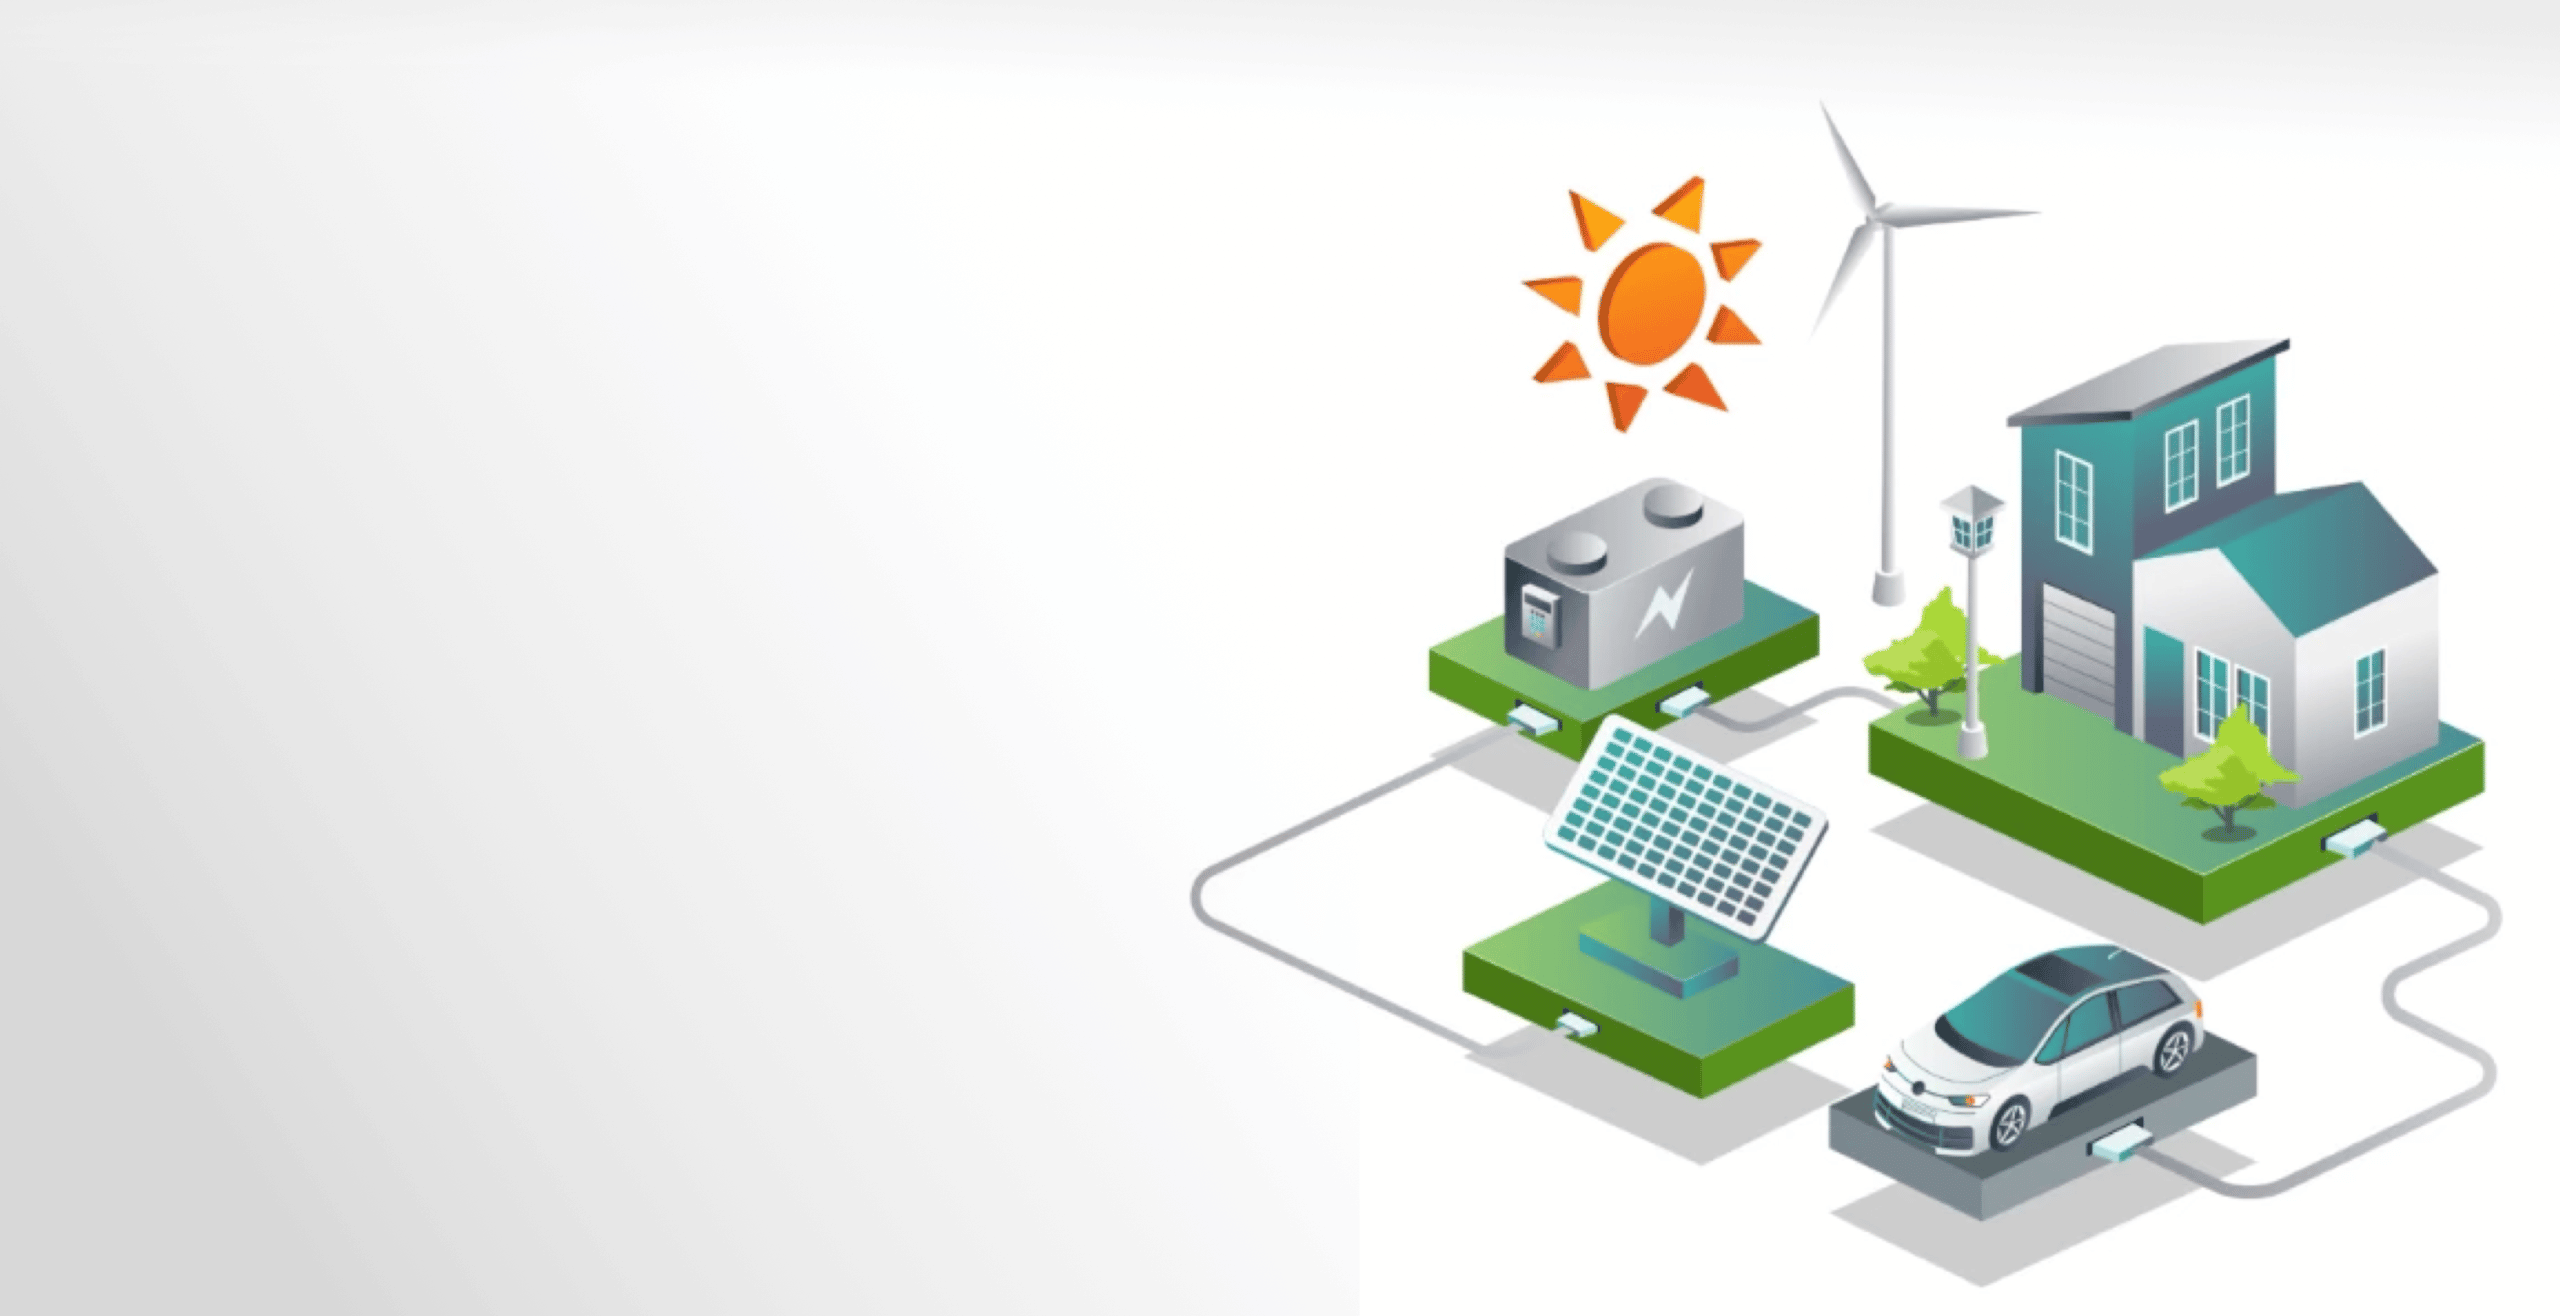 Are You Ready to Take Advantage of the Growing Demand for Nanogrids?